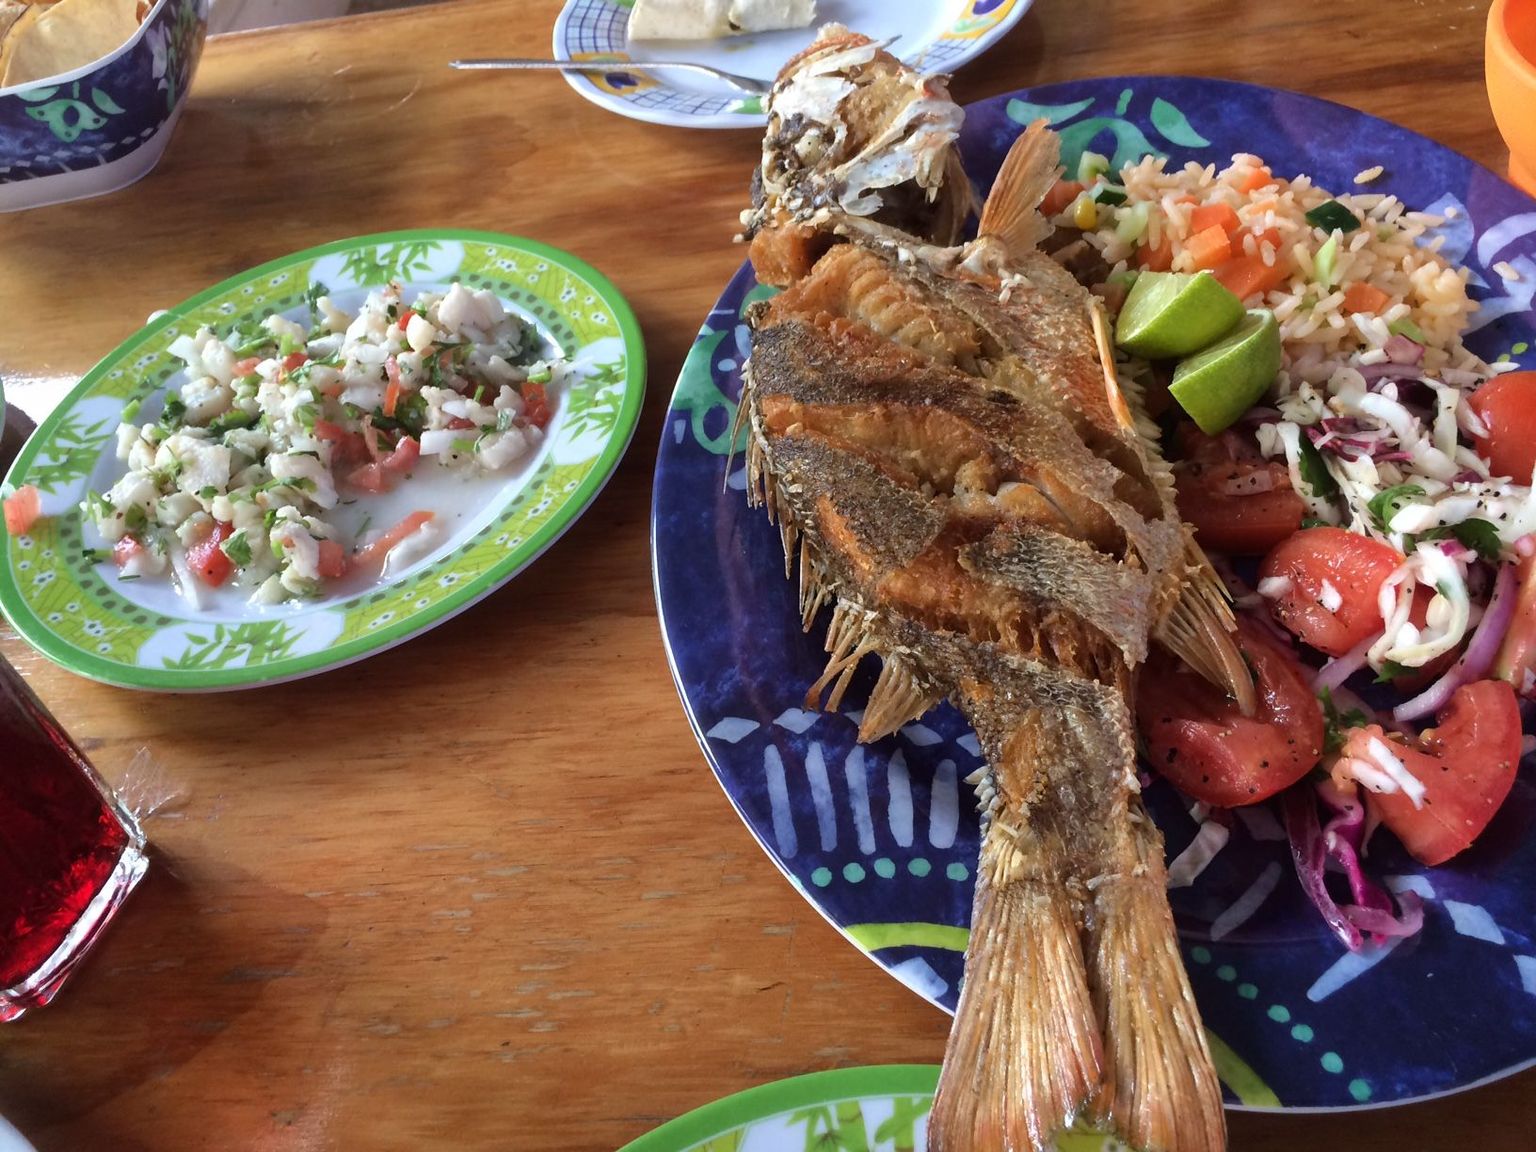 Ceviche and Fried Fish